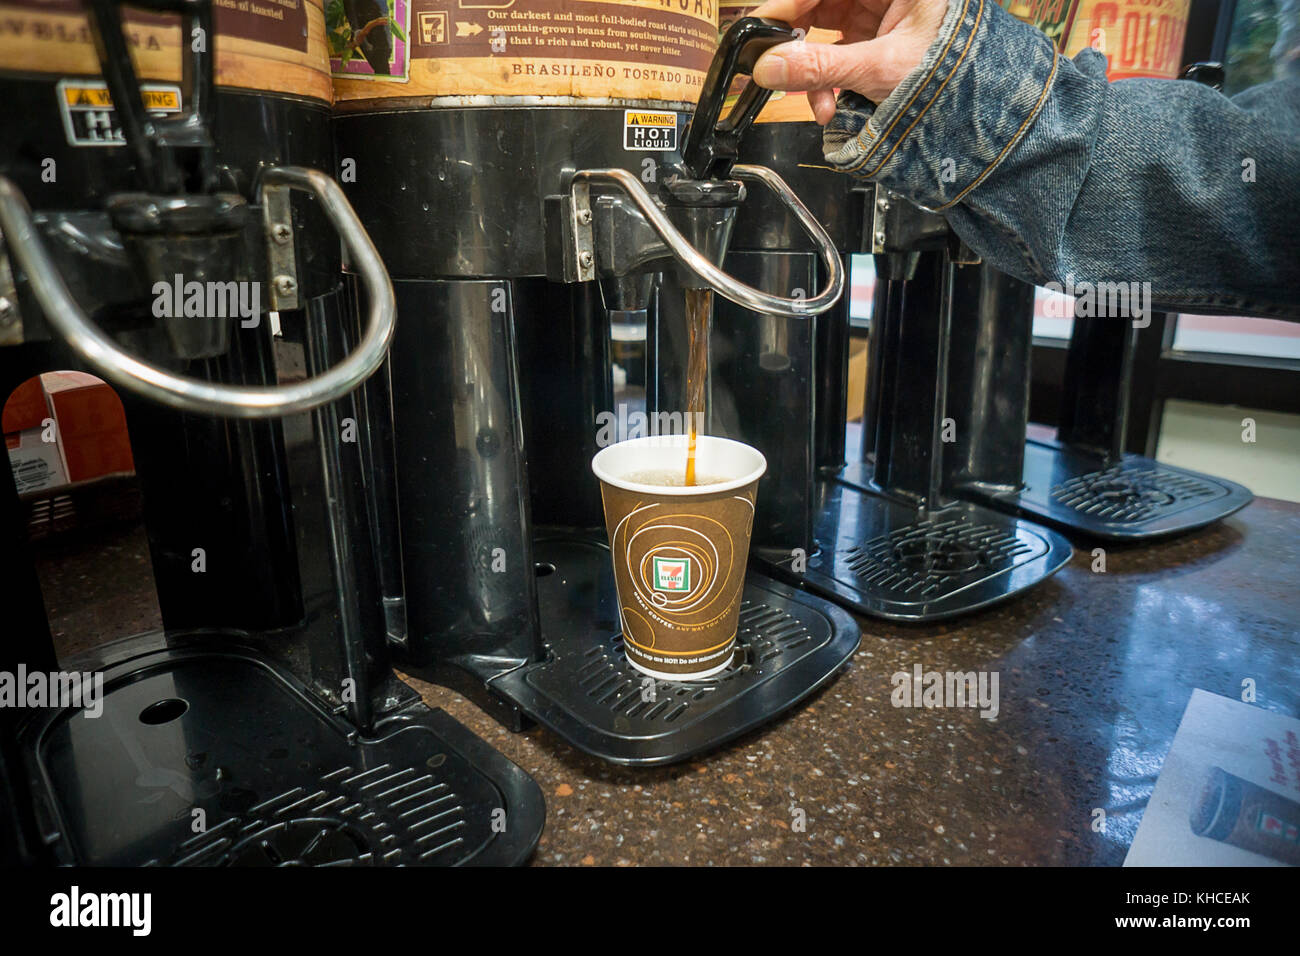 A coffee drinker fills up her cup with Brazilian Roast coffee in a 7-Eleven store in New York on Tuesday, November 8, 2017. Small coffee shops and cafes, which procreated in the last few years due to the popularity of specialty coffee, are suffering as larger chains such as 7-Eleven, Dunkin' Donuts and even McDonald's get into the business of selling specialty coffees at prices lower than local shops. The ubiquity of the larger chains is also making it more convenient for consumers to get a decent coffee fix. (© Richard B. Levine) Stock Photo